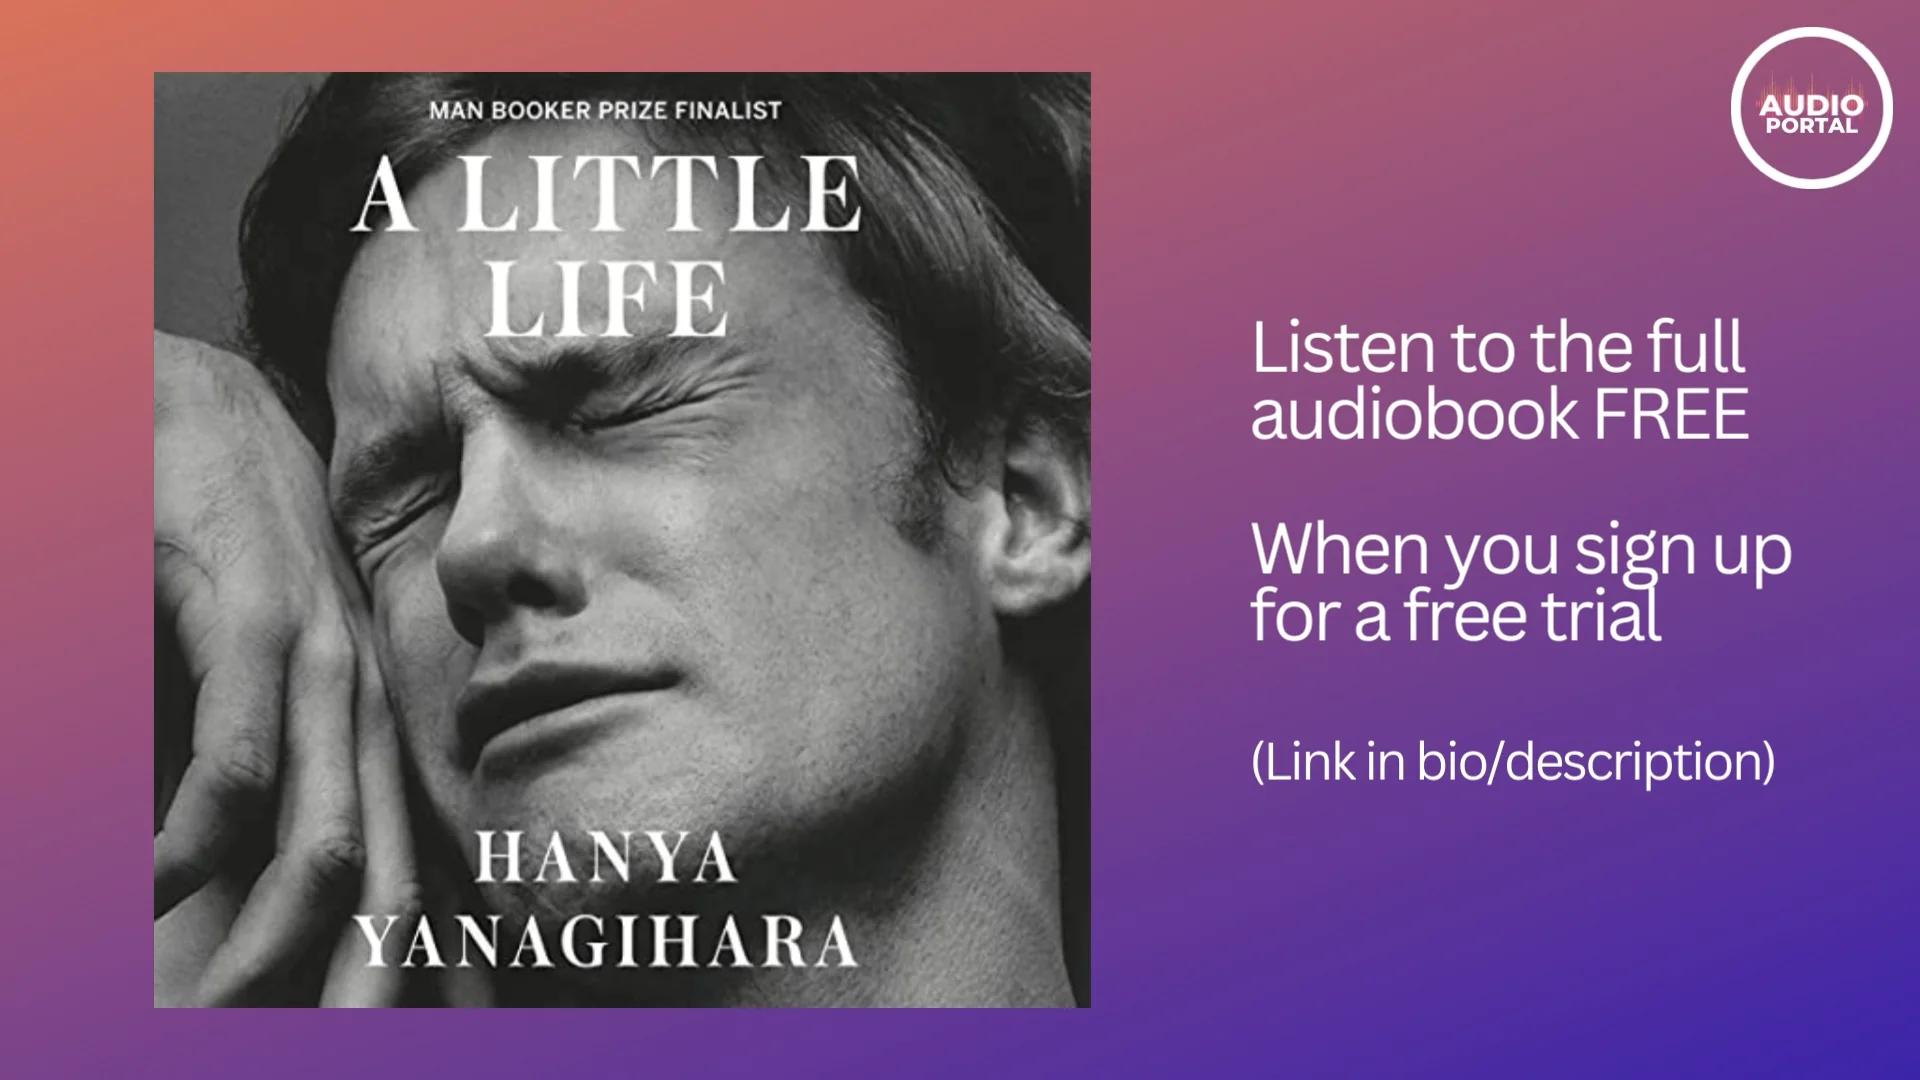 A Little Preview of A Little Life by Hanya Yanagihara